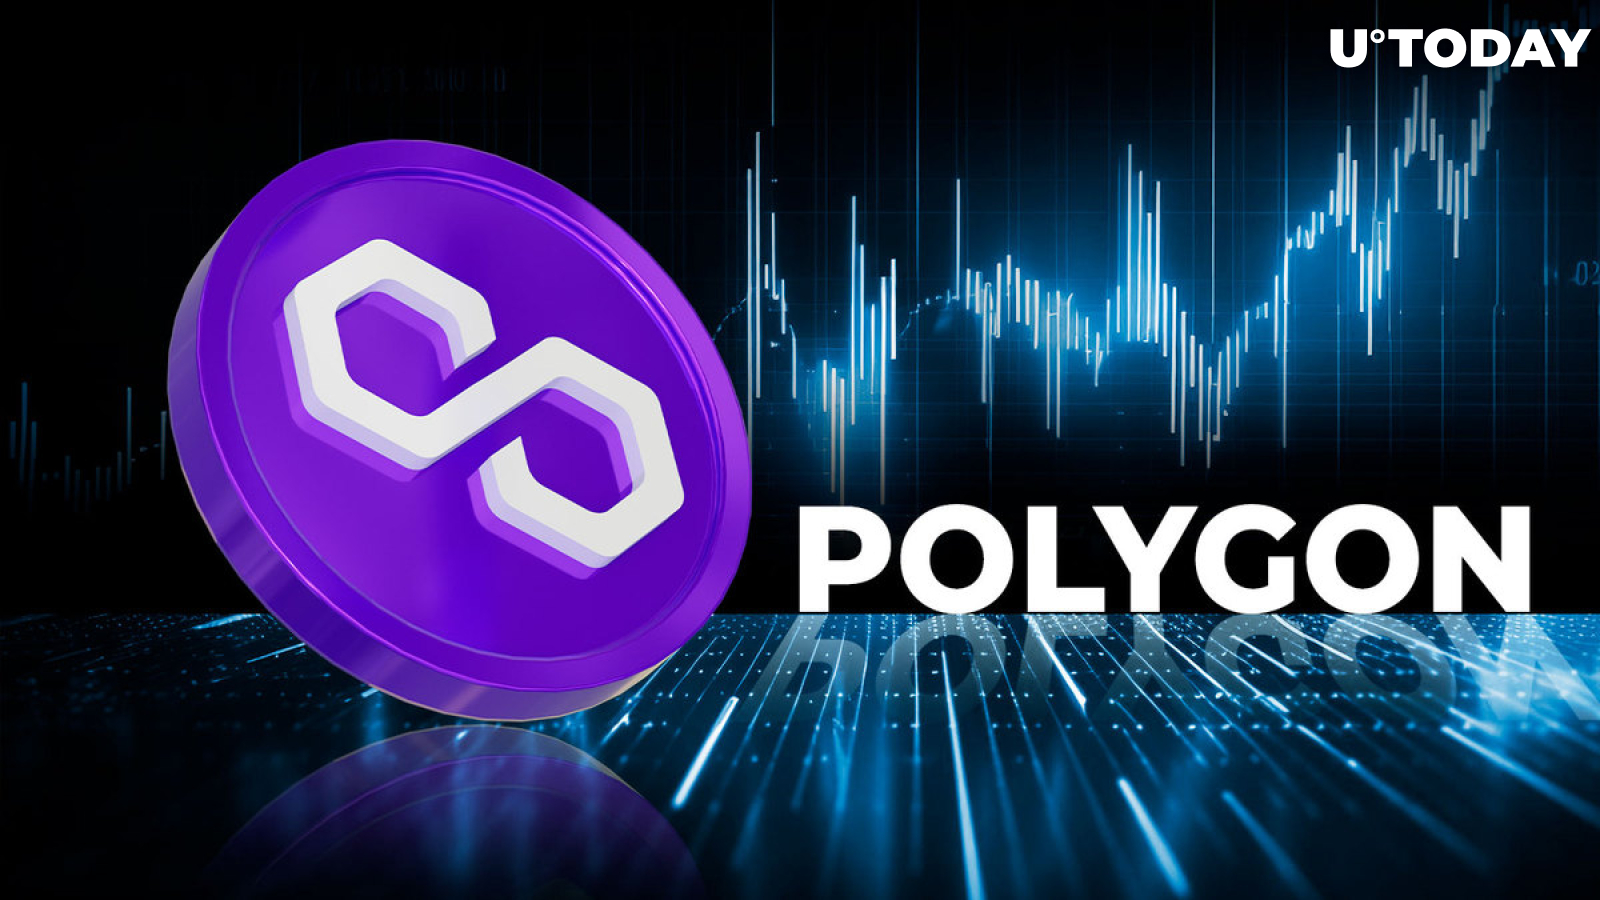 Polygon (MATIC) Jumps 10% as Bulls Awaken With Dose of Promise